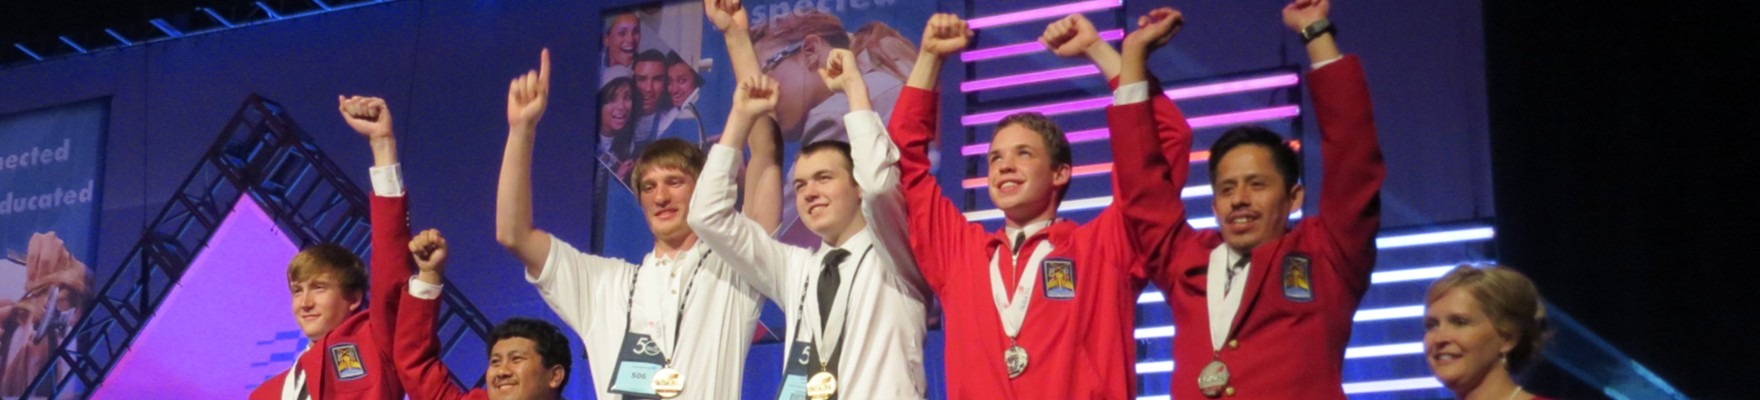 students celebrating wins at SkillsUSA competition